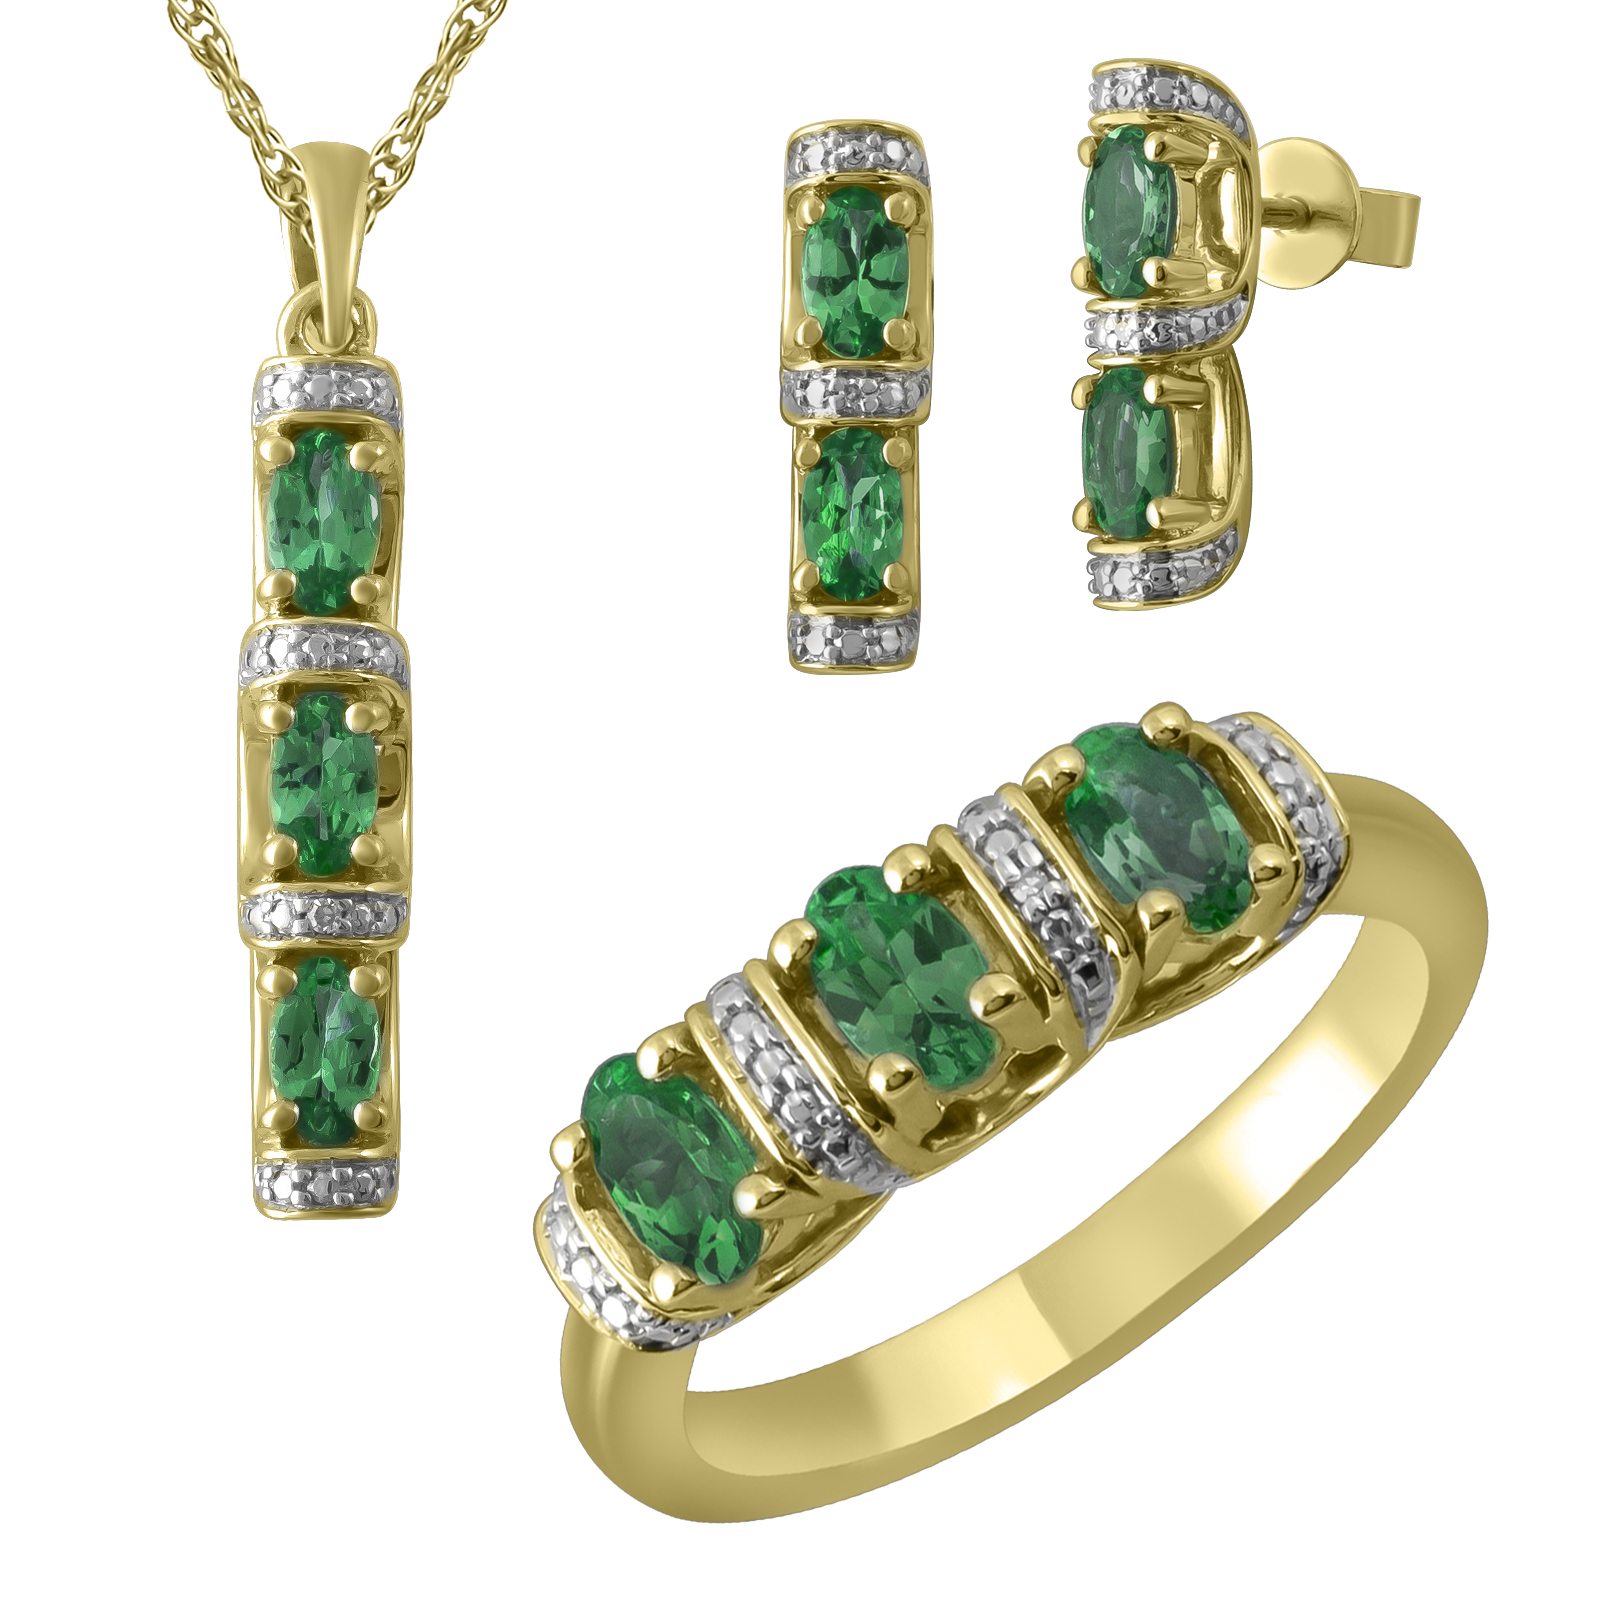 3 Piece Gold over Silver Emerald Earring, Pendant and Ring Box Set